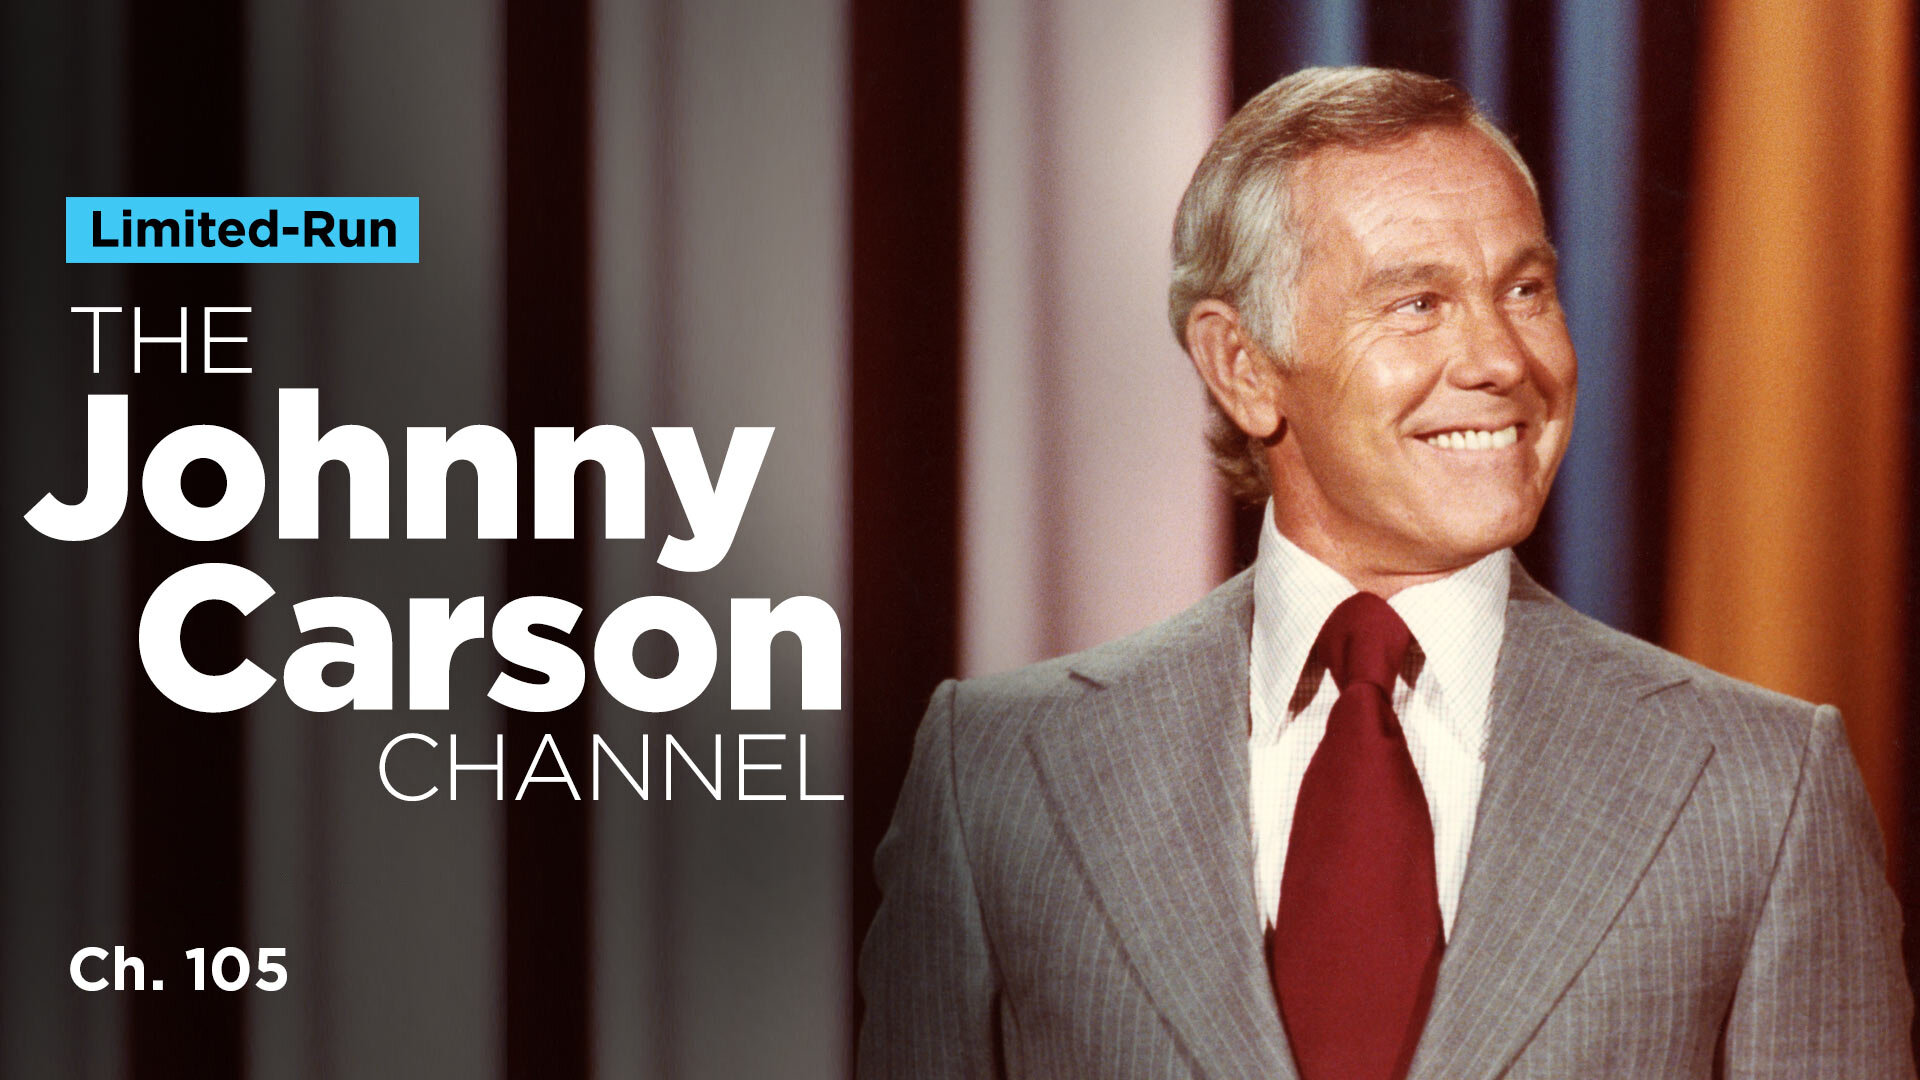 Morning Tea: The Johnny Carson Channel